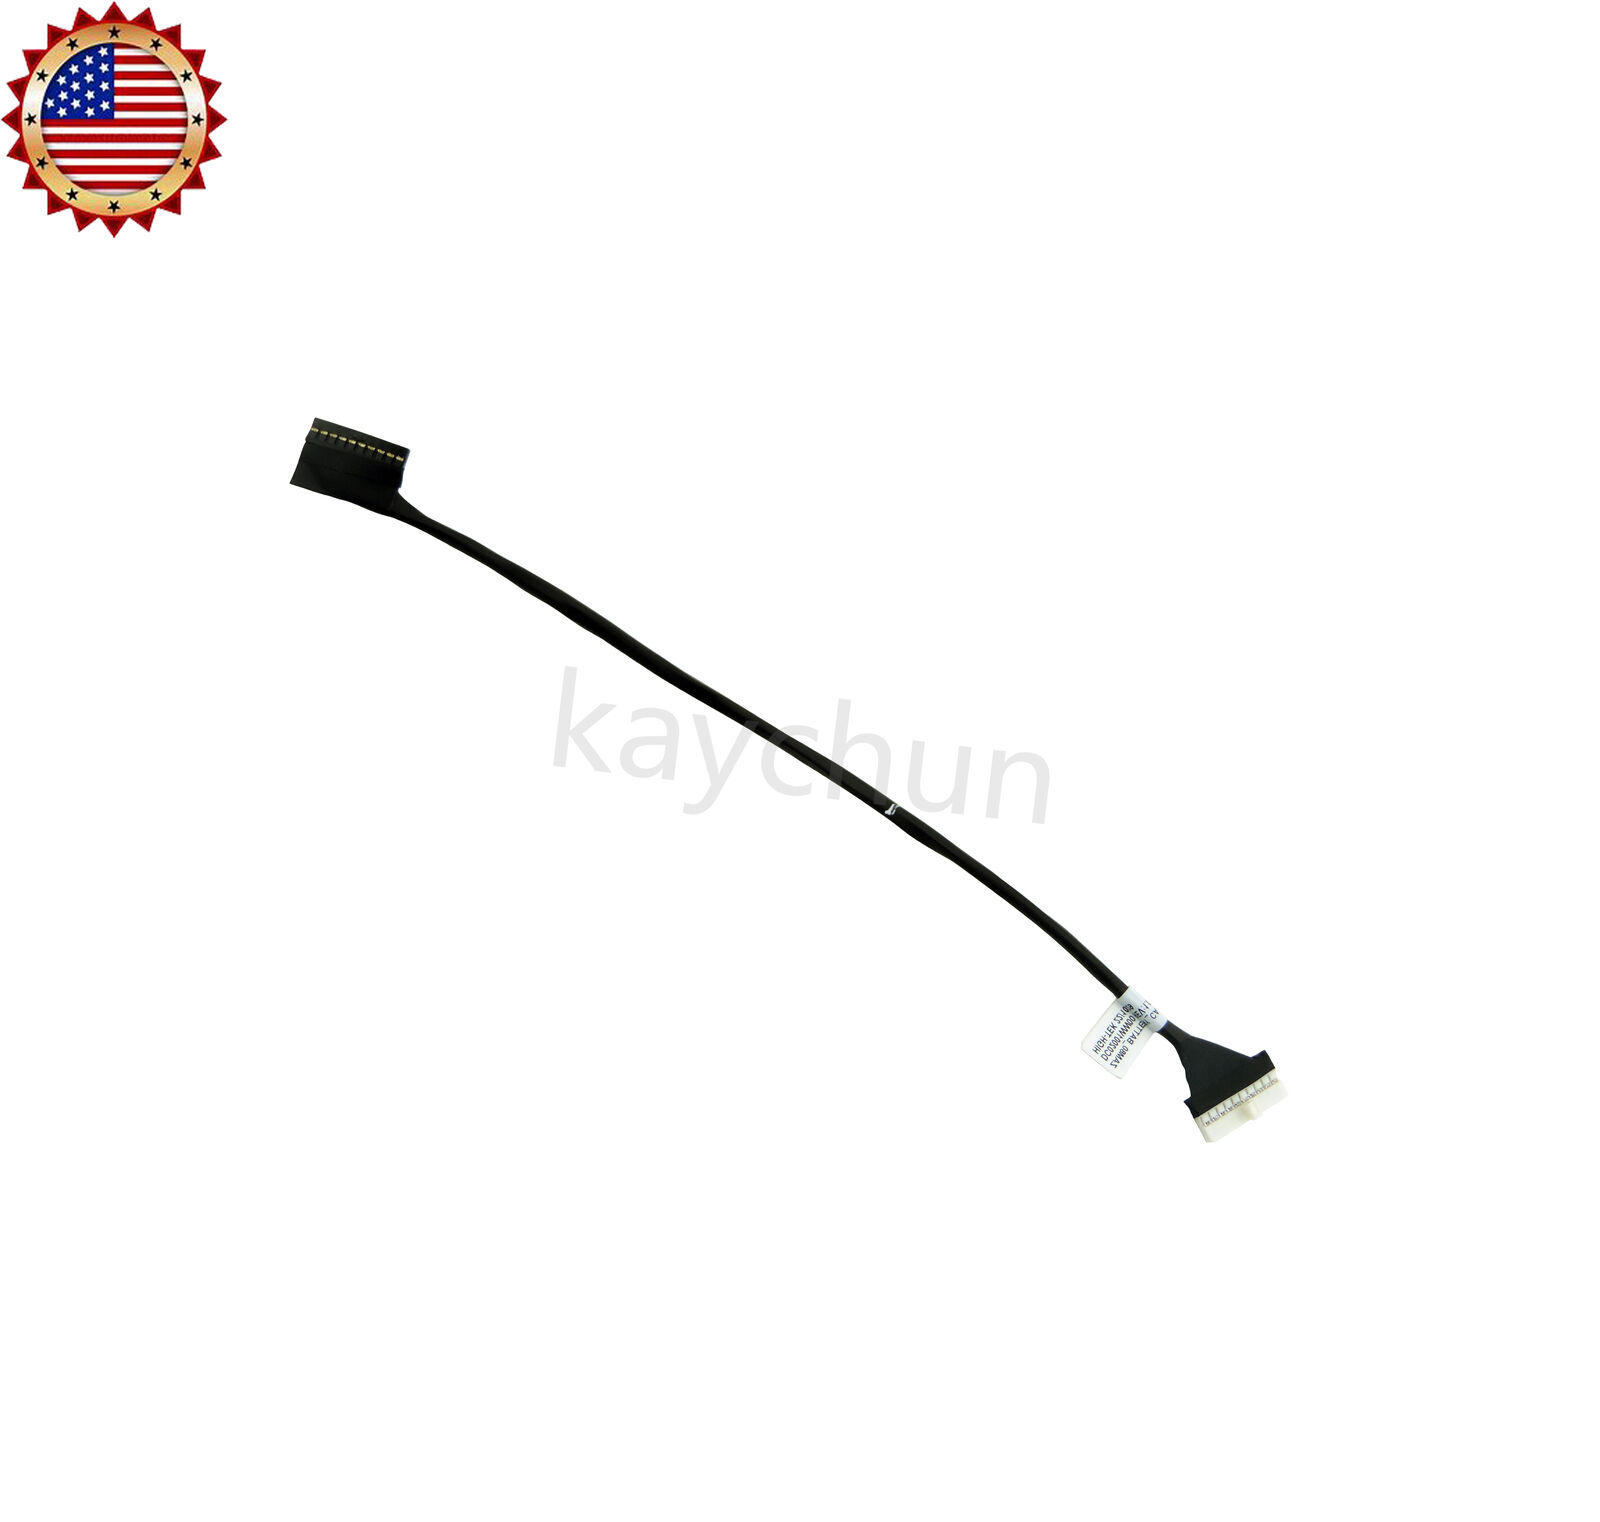 Lot 5/10pcs Battery cable wire For Dell Latitude E5550 Laptop DC02001WW00 0NWD9K